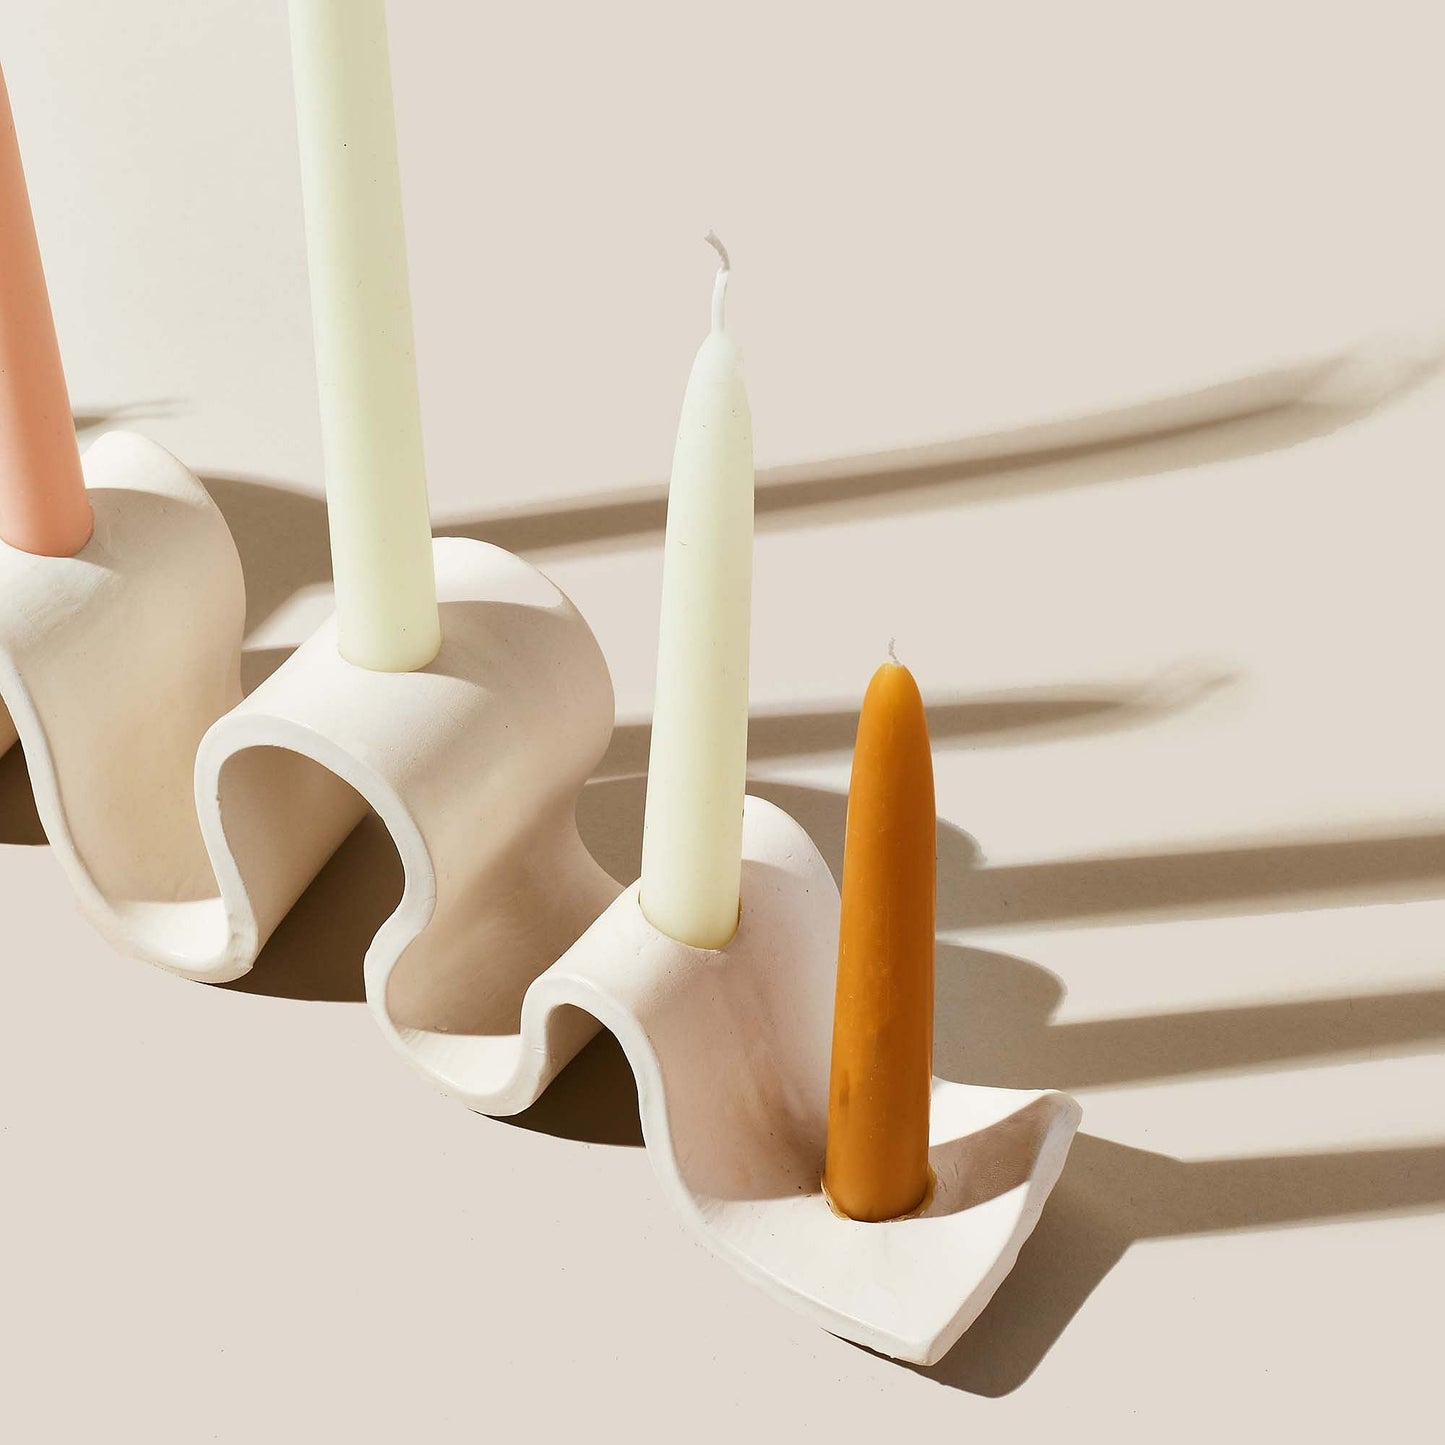 Meet Weylyn: A candelabra whose dramatic and unique appearance as a centerpiece that'll demand more attention than even your most vocal guest. Handmade in Brooklyn, NY.